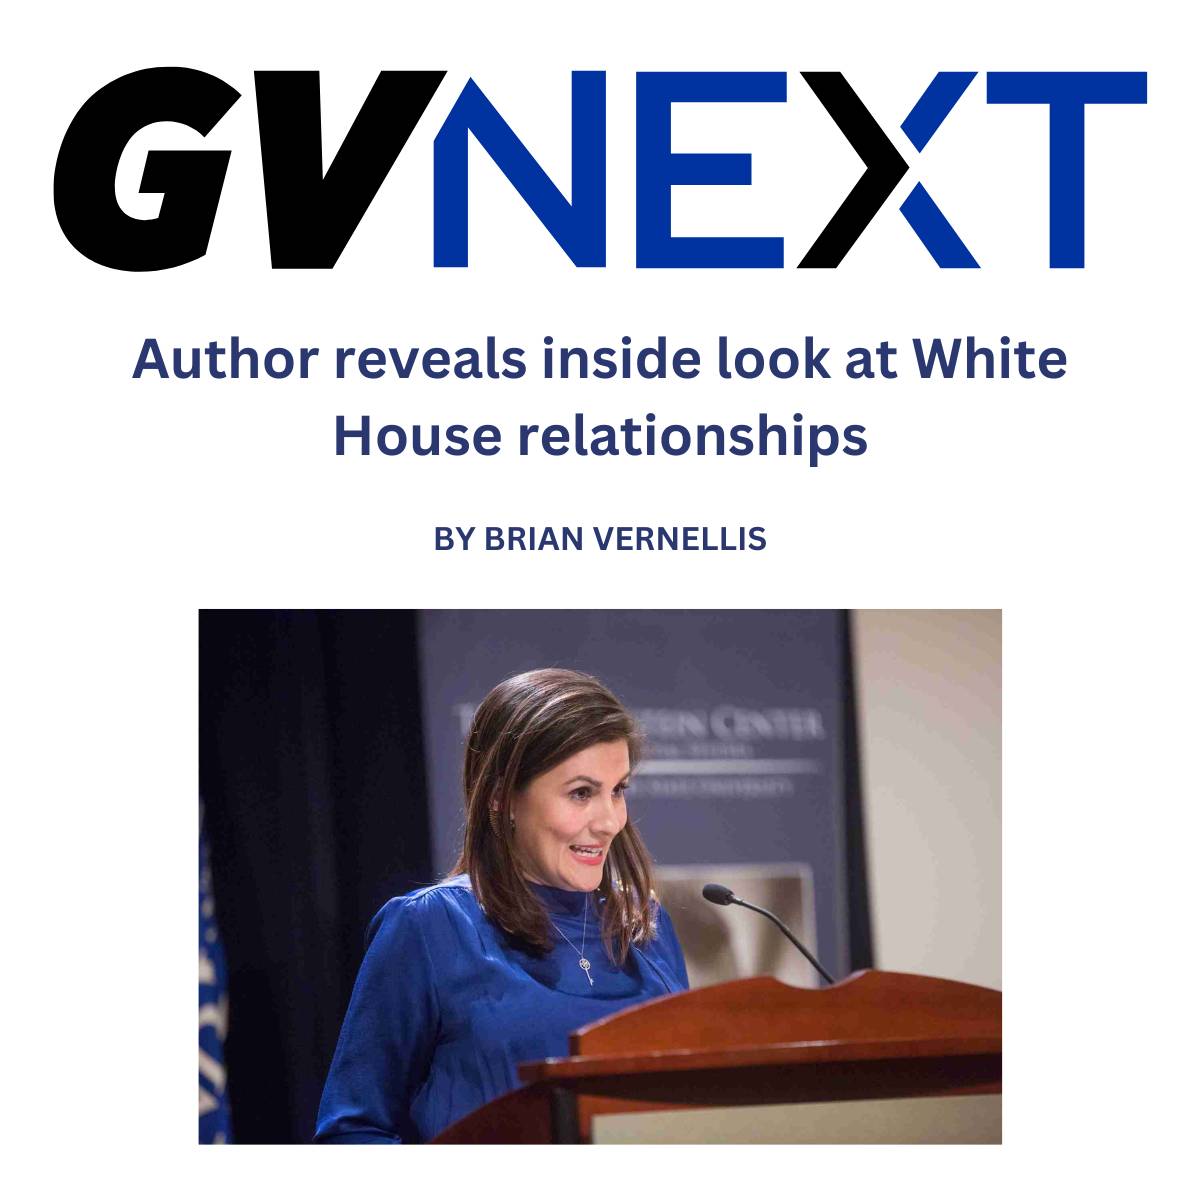 GVNext: Author reveals inside look at White House relationships by Brian Vernellis